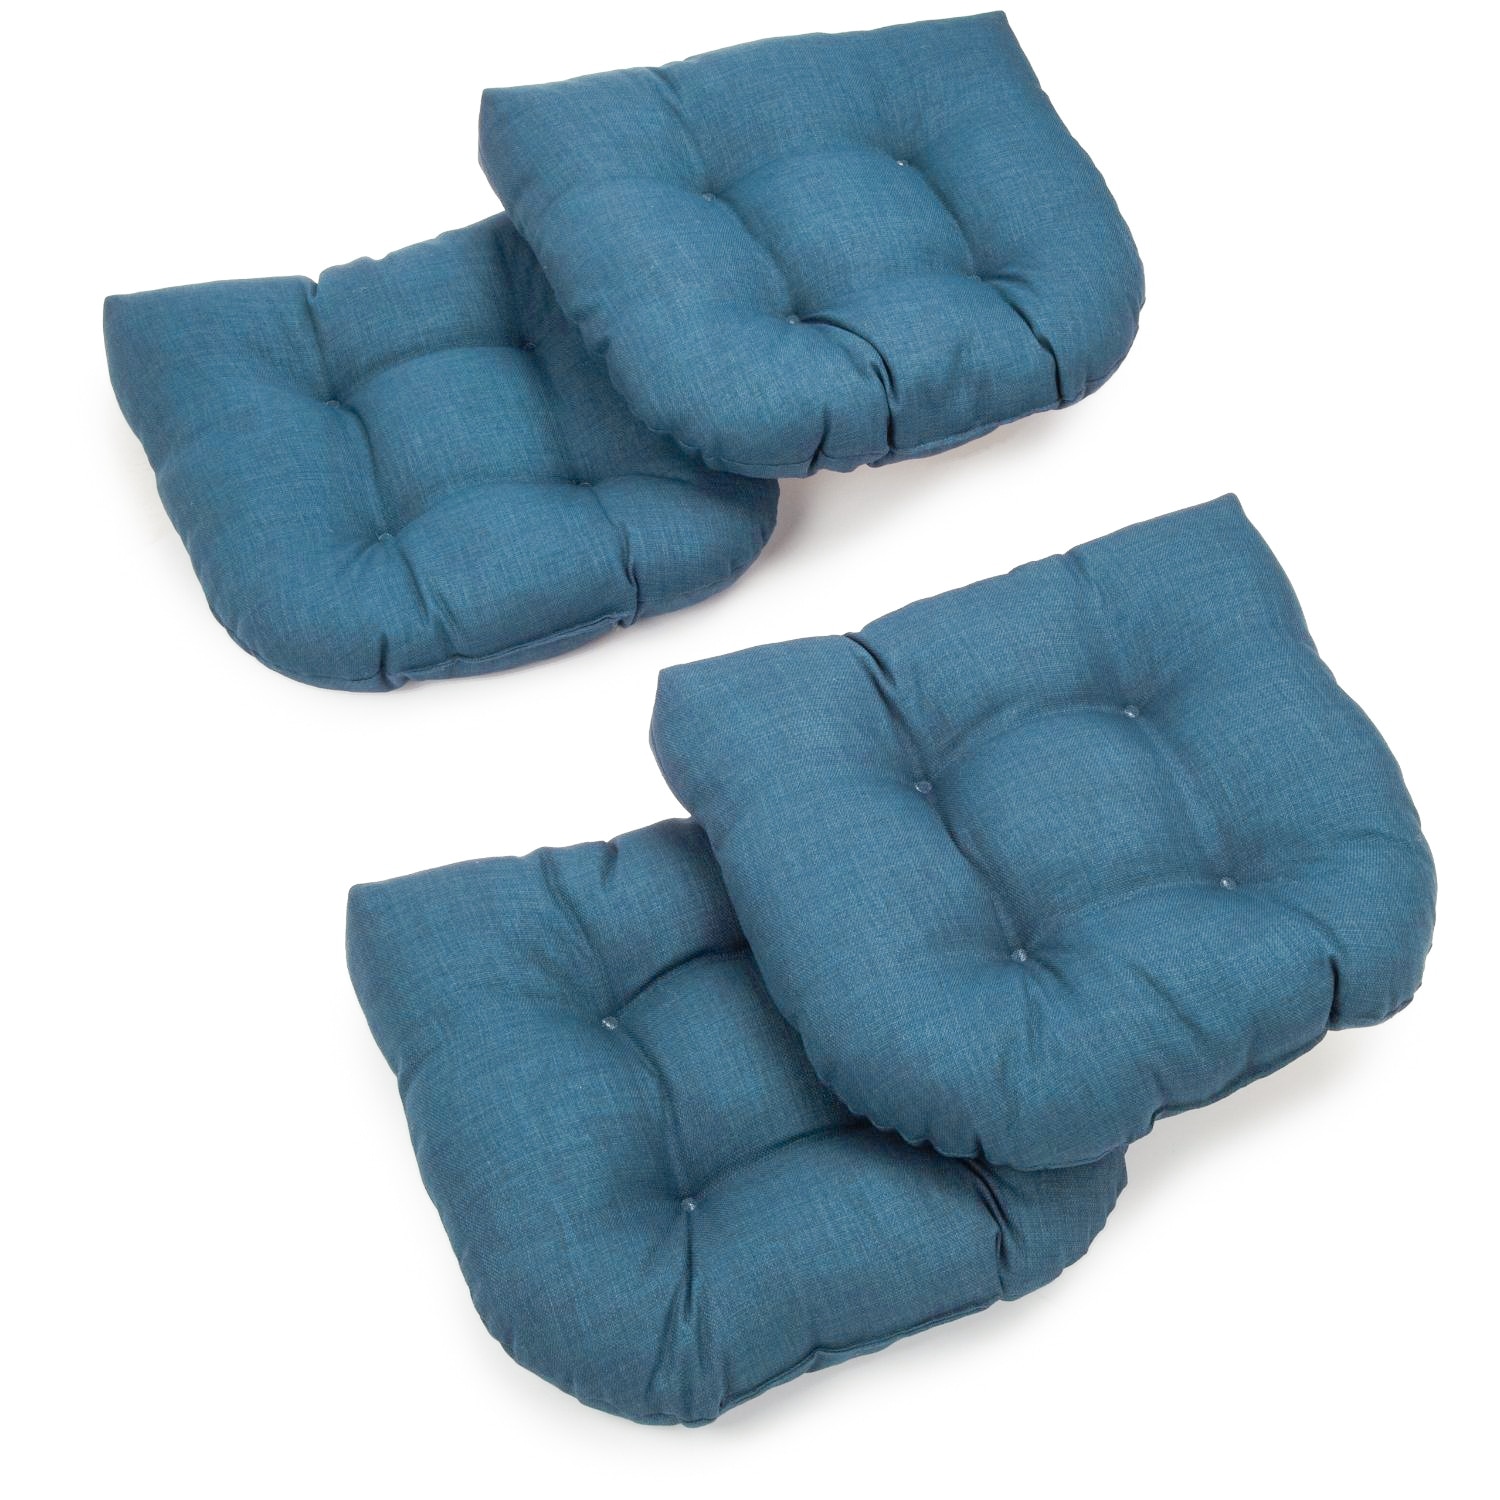 https://ak1.ostkcdn.com/images/products/is/images/direct/9b2f50db6a3e80e500d13d7f20fb378a745d53bb/Blazing-Needles-19-inch-Indoor-Outdoor-Chair-Cushion-%28Set-of-4%29.jpg